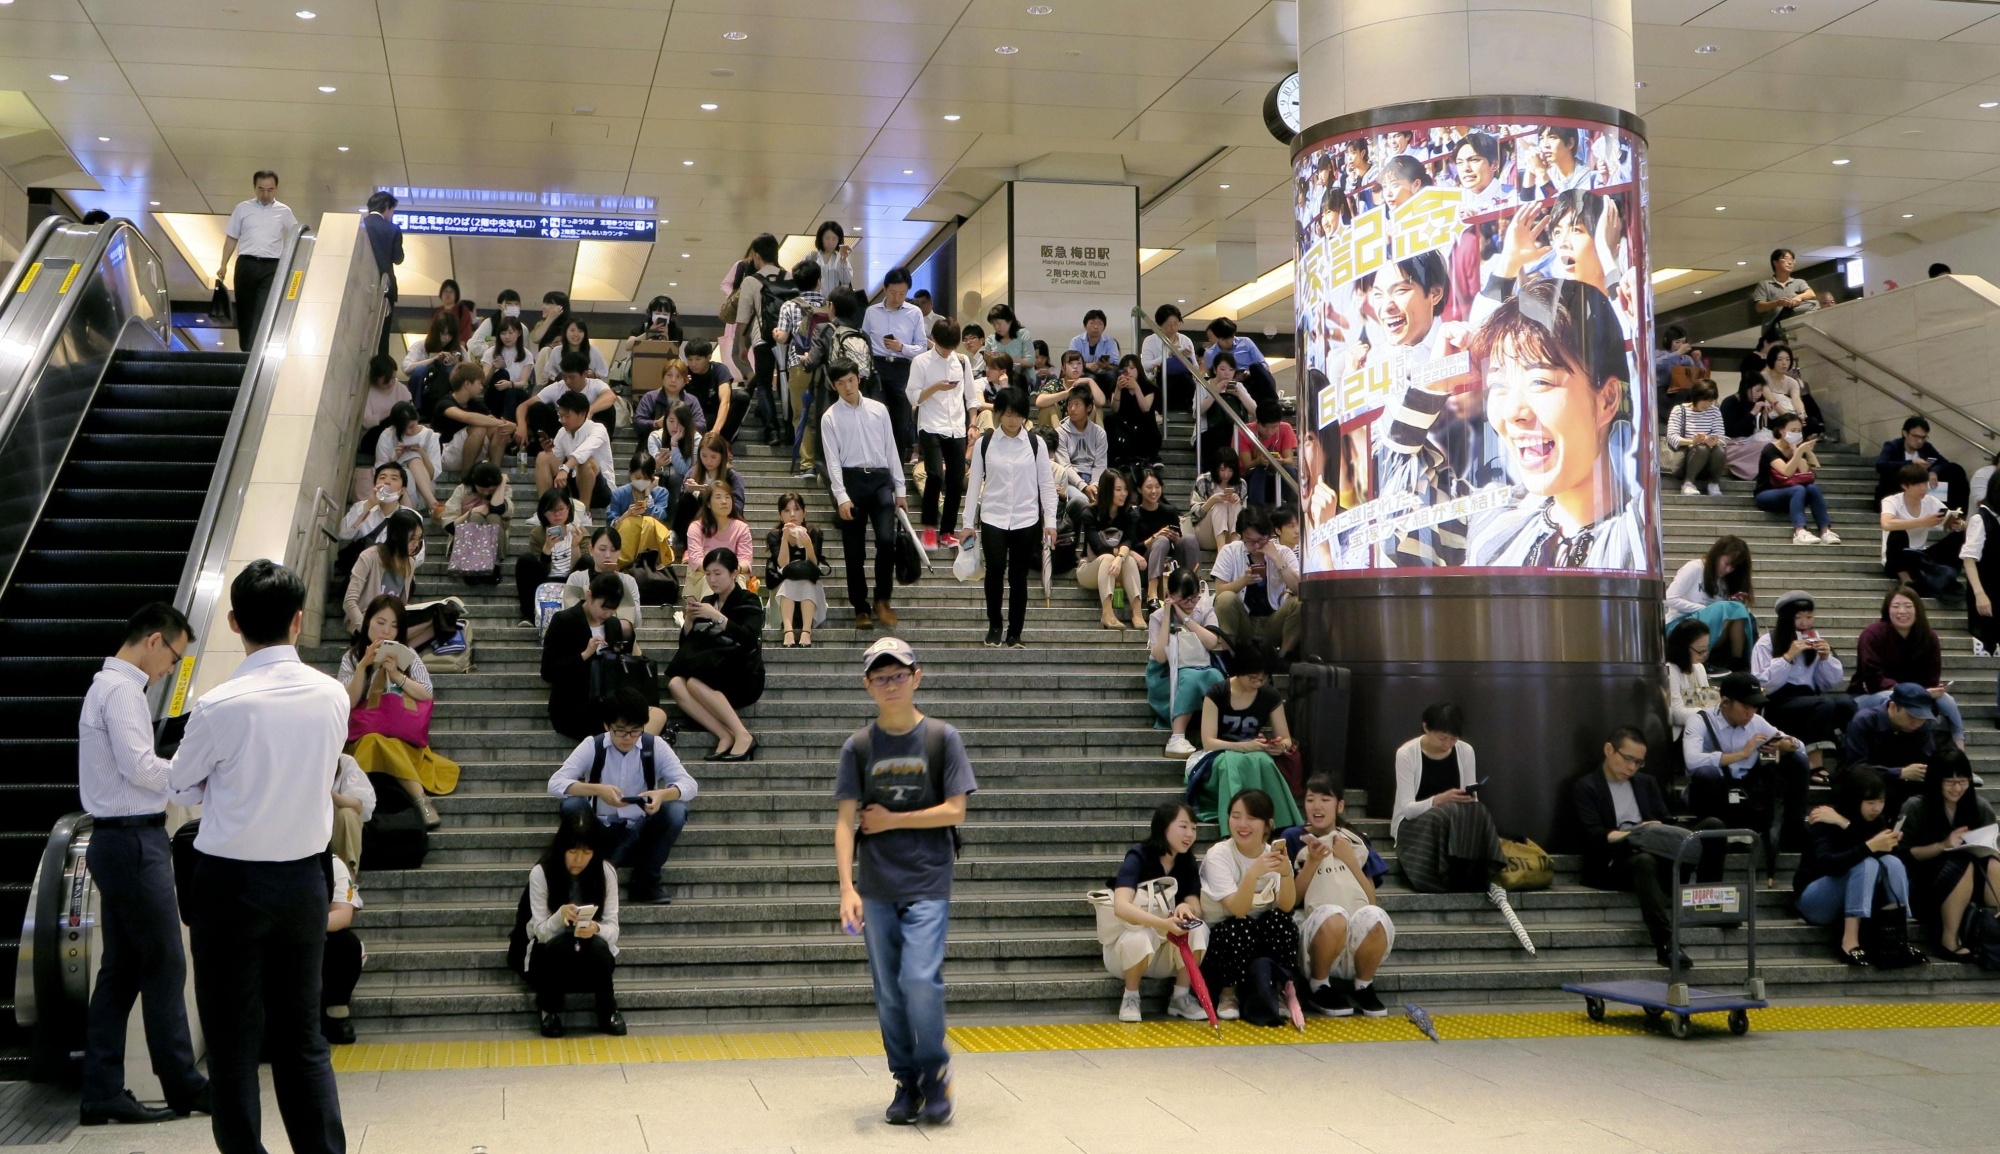 People sit on the stairs of Hankyu Railway's Umeda Station in the city of Osaka on Monday morning, after train operations were suspended following a major earthquake that hit the Kansai region. | KYODO